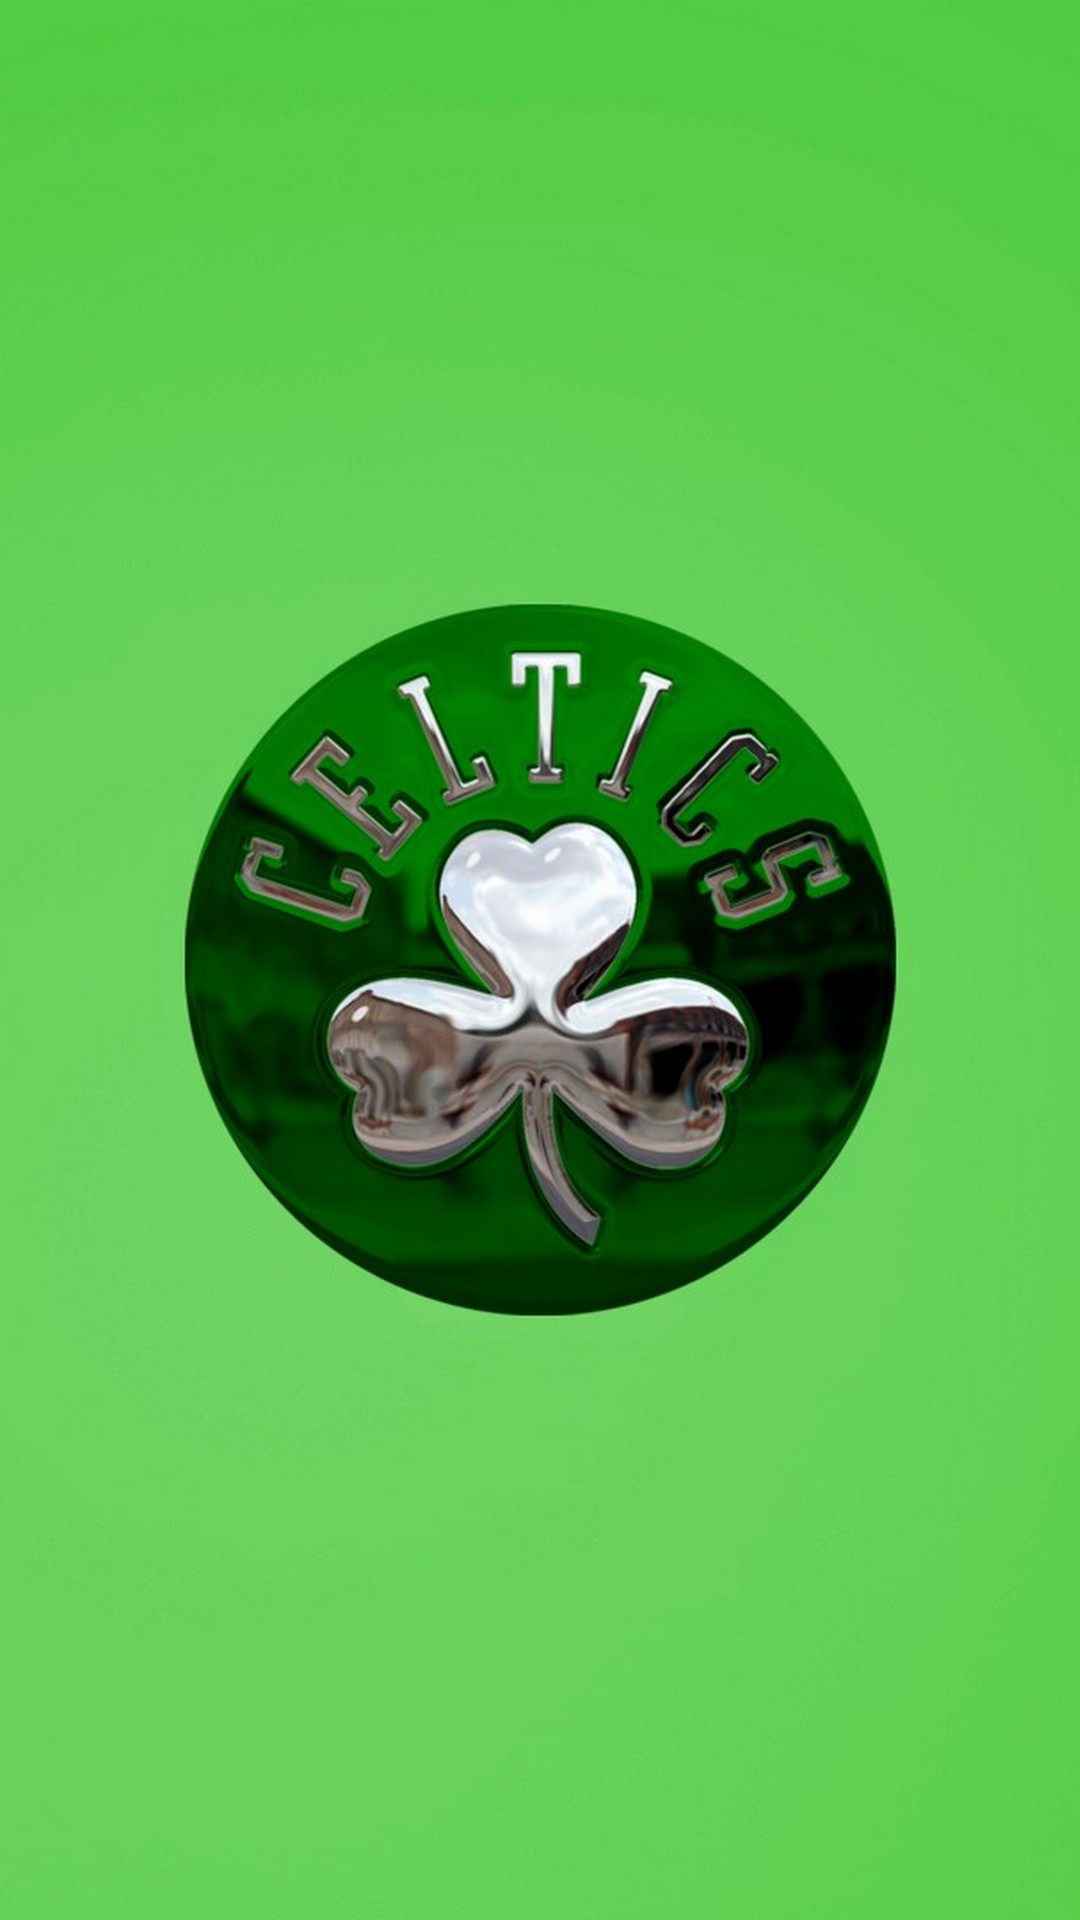 Mobile Wallpapers Boston Celtics Logo with resolution 1080X1920 pixel. You can make this wallpaper for your iPhone 5, 6, 7, 8, X backgrounds, Mobile Screensaver, or iPad Lock Screen